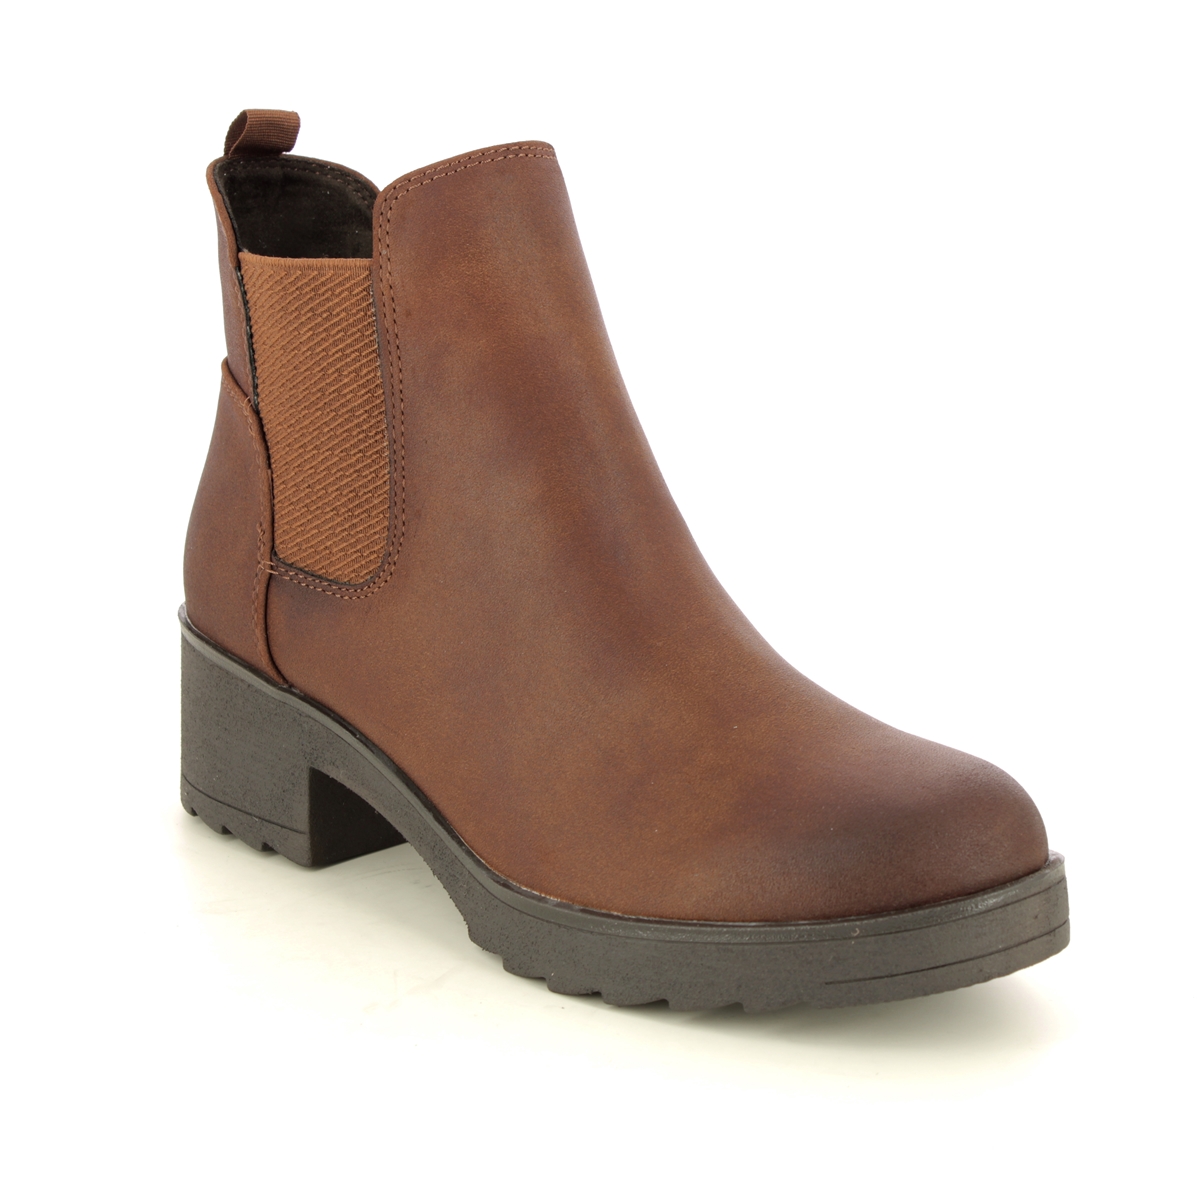 Marco Tozzi Dono Chelsea Tan Womens Chelsea Boots 25806-41-396 in a Plain Man-made in Size 41